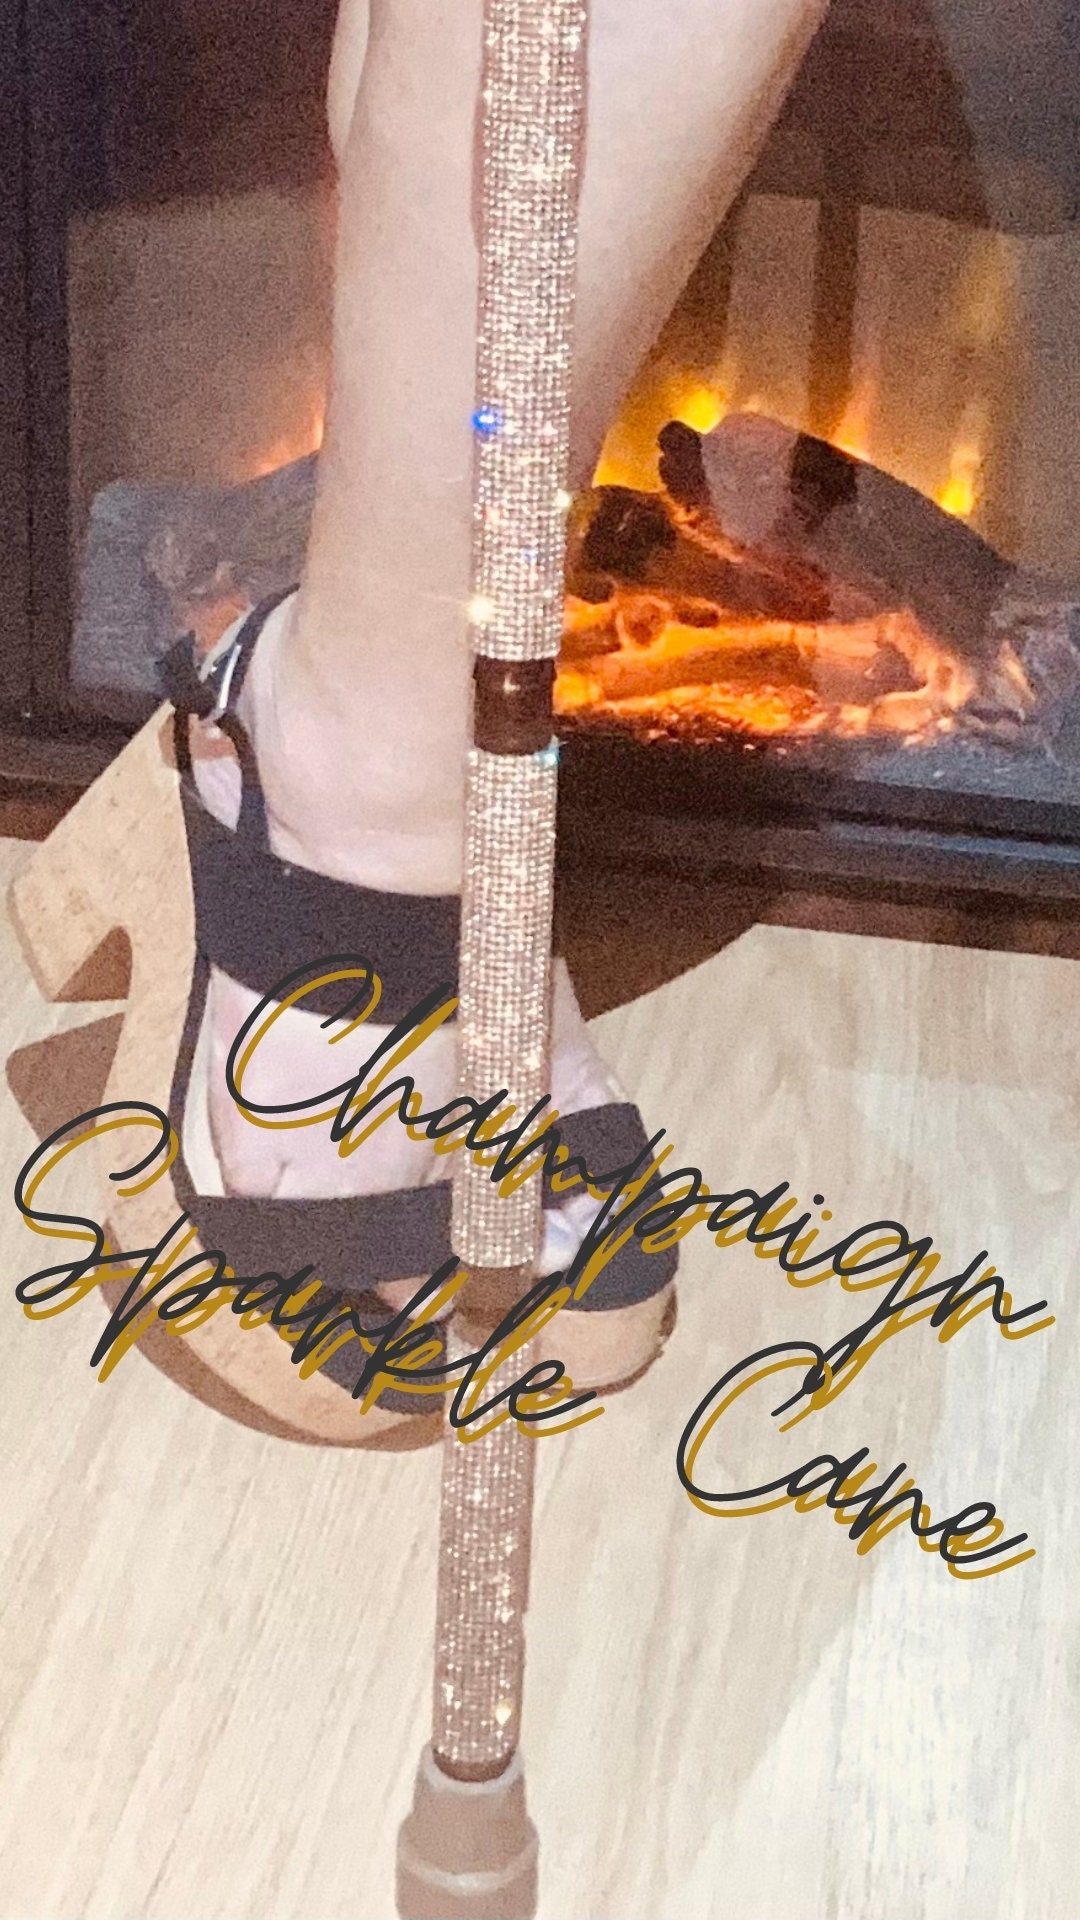  OrthoGlam Sparkling Champagne Lightweight Crystal Rhinestone  Bedazzled Fashion Cane - Fashionable Rhinestone Bling Wooden Walking Stick  for Balance Assistance (Small) : Health & Household